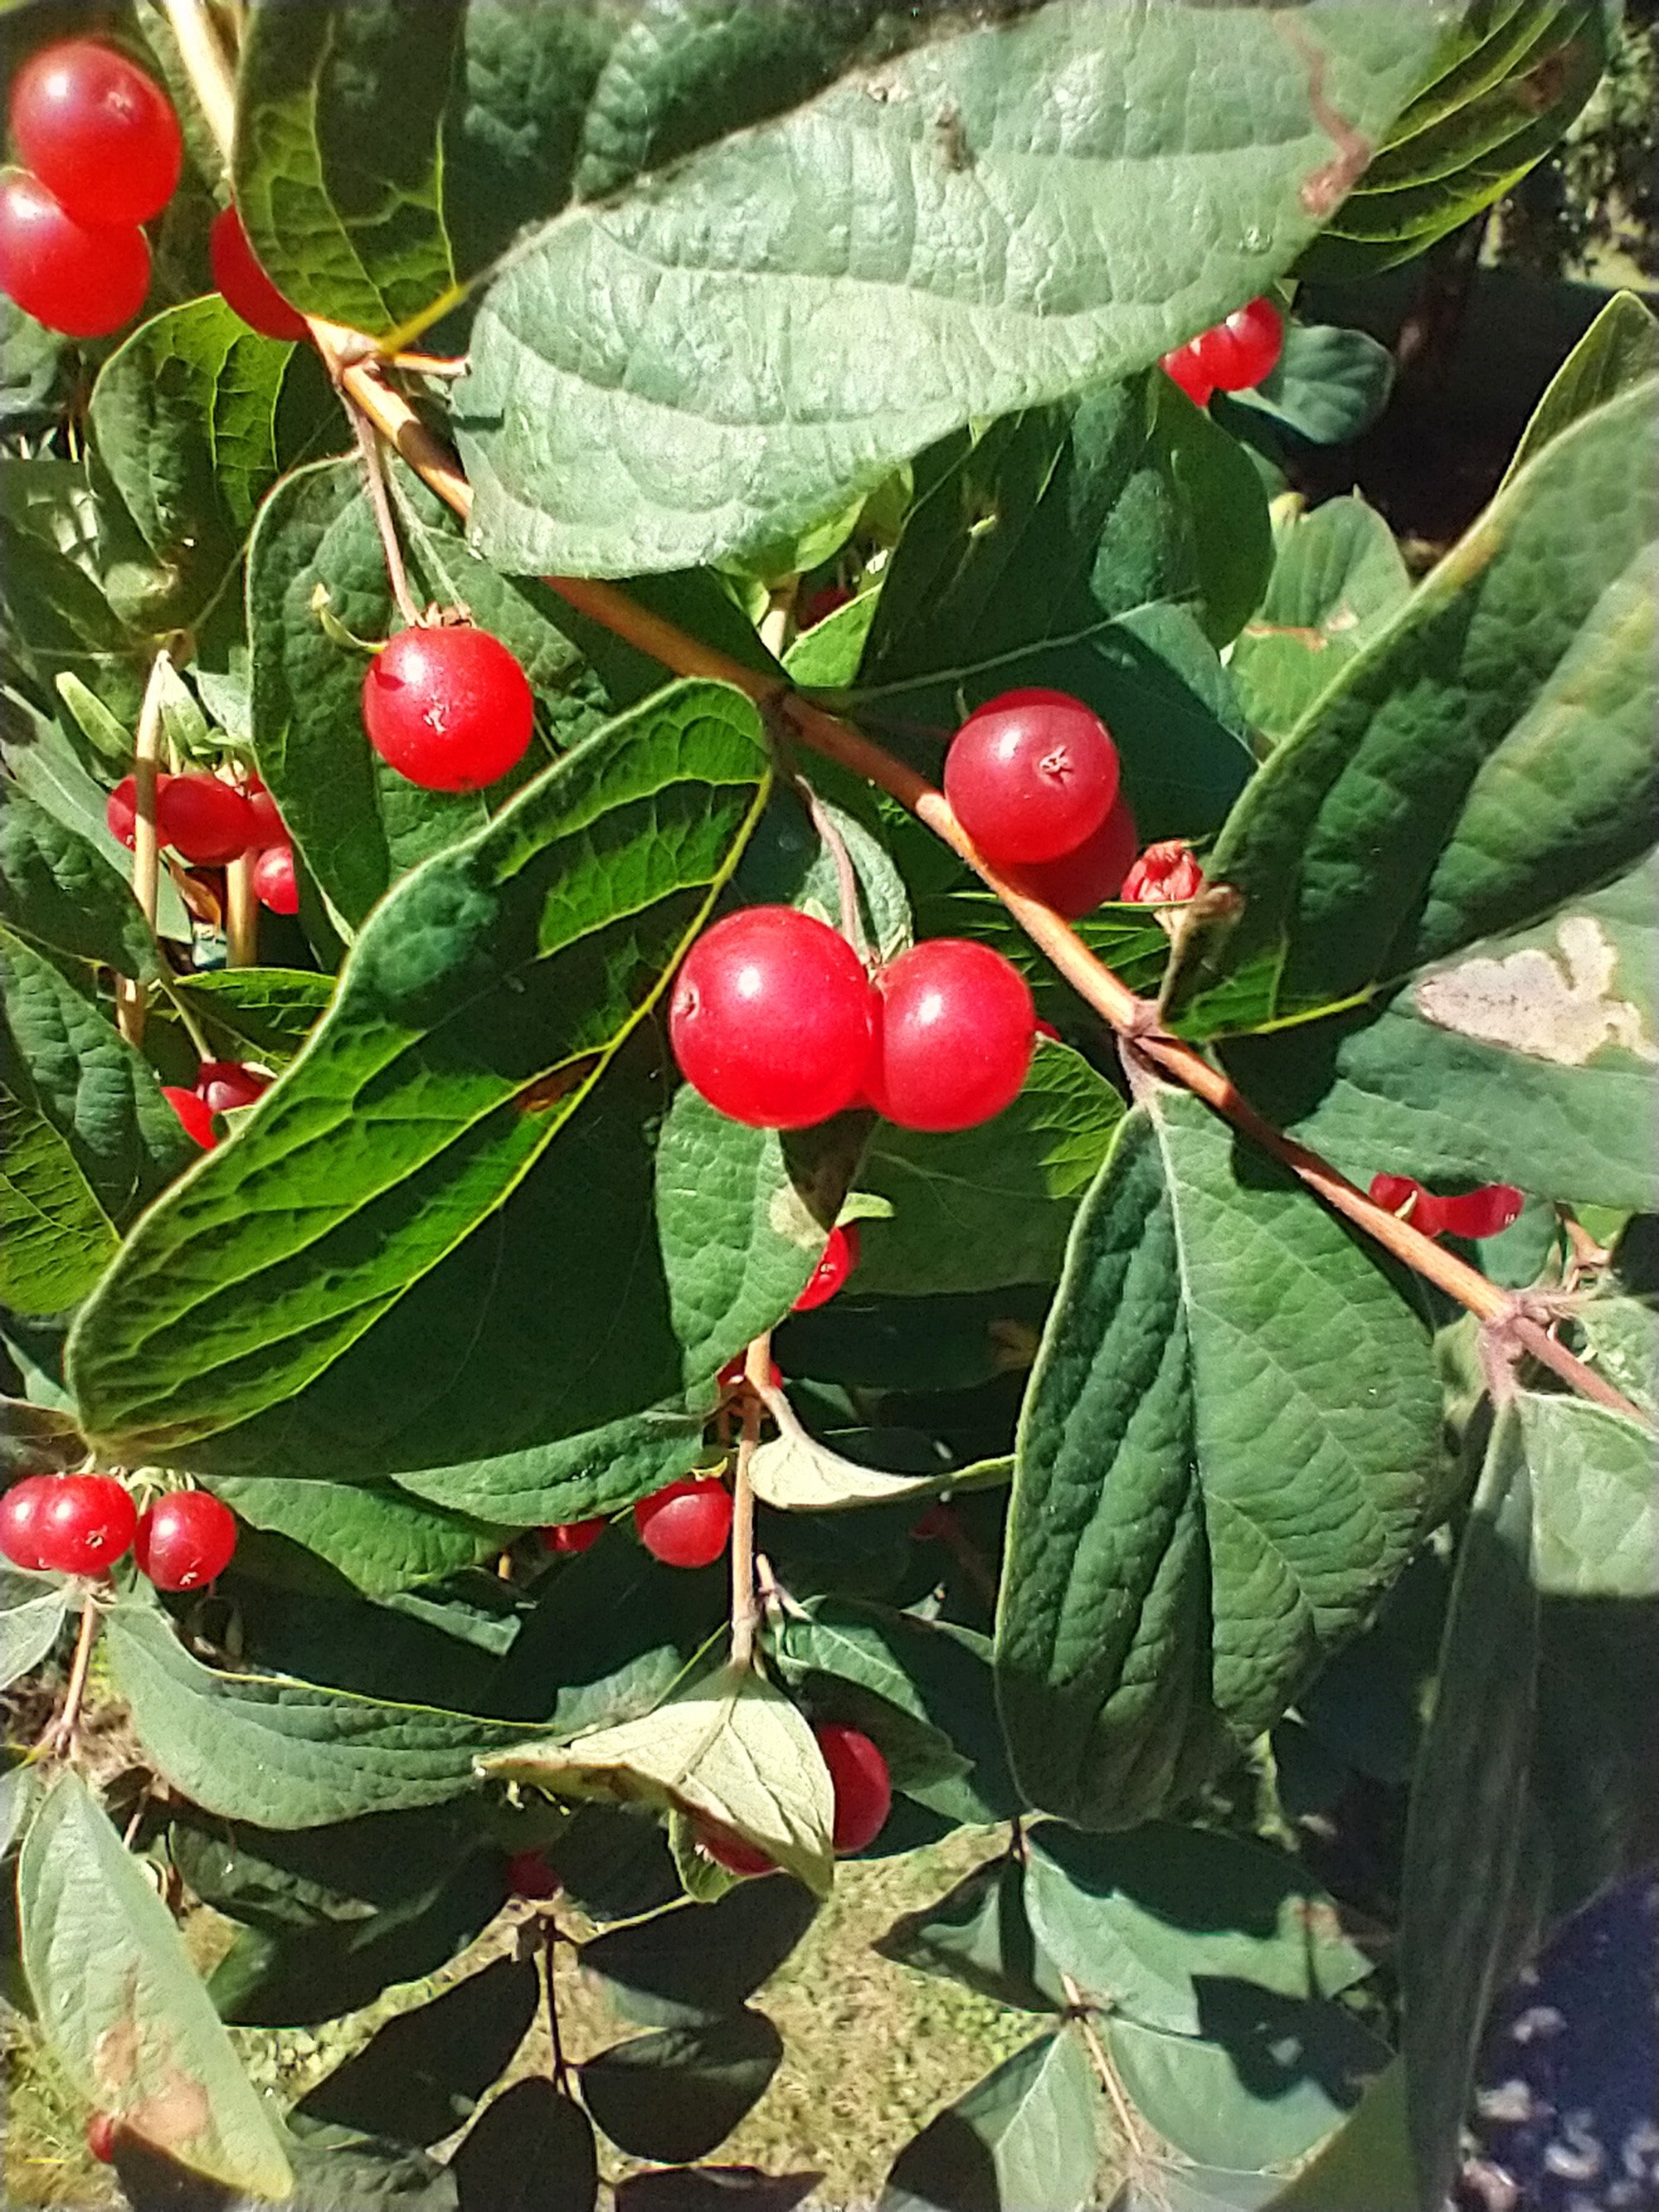 Berries on the path. Hm. Look so plump... so juicy.... maybe just... one...?